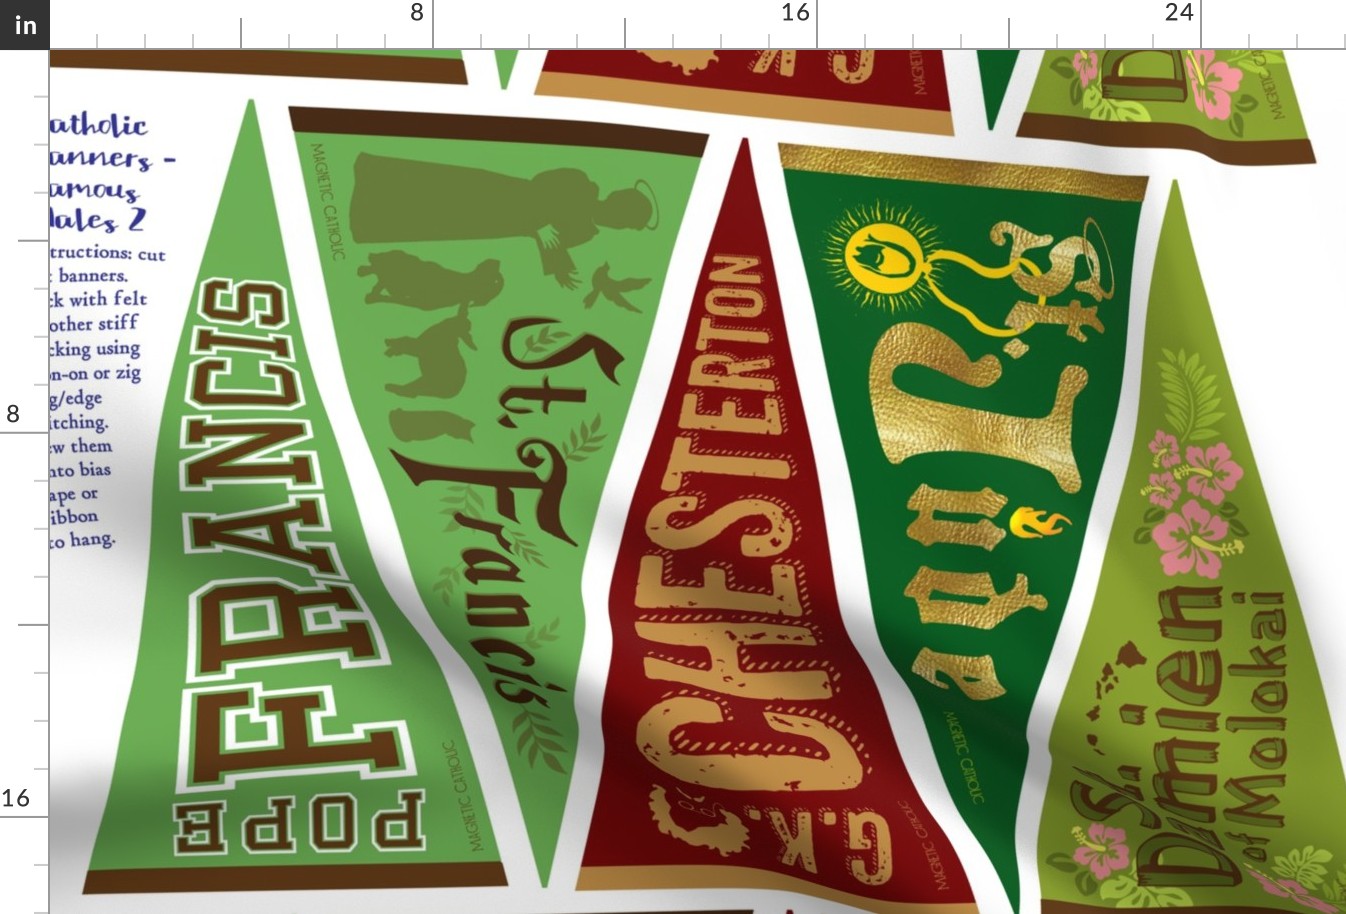 Catholic Banners - Famous males 2 cut and sew 27 x 18 inches